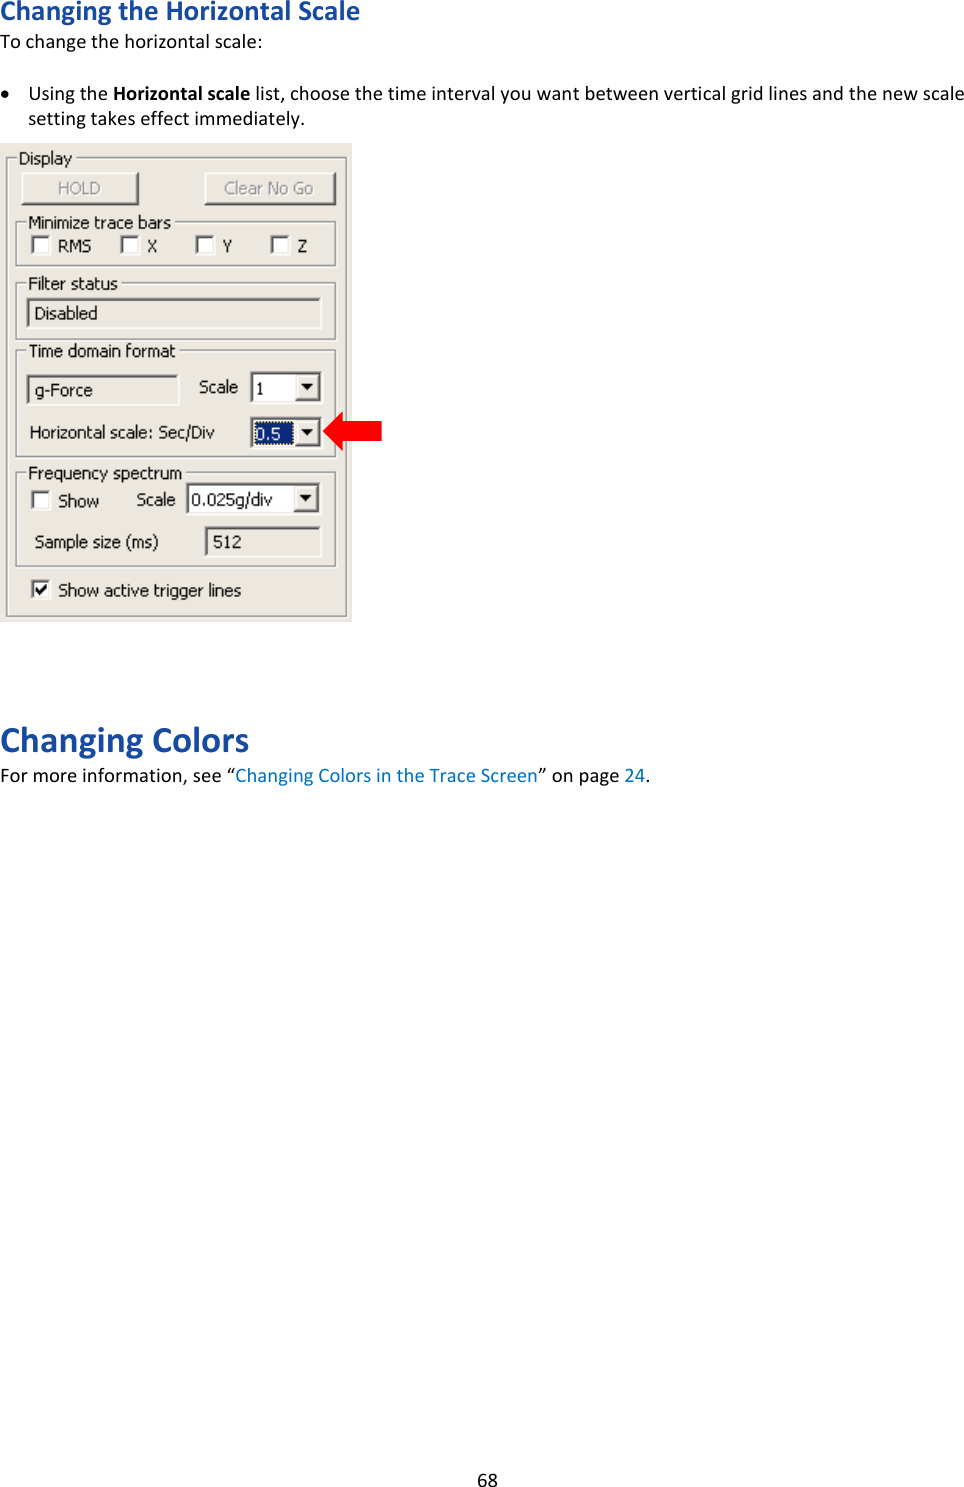   68 Changing the Horizontal Scale To change the horizontal scale:  • Using the Horizontal scale list, choose the time interval you want between vertical grid lines and the new scale setting takes effect immediately.                        Changing Colors For more information, see “Changing Colors in the Trace Screen” on page 24.                          